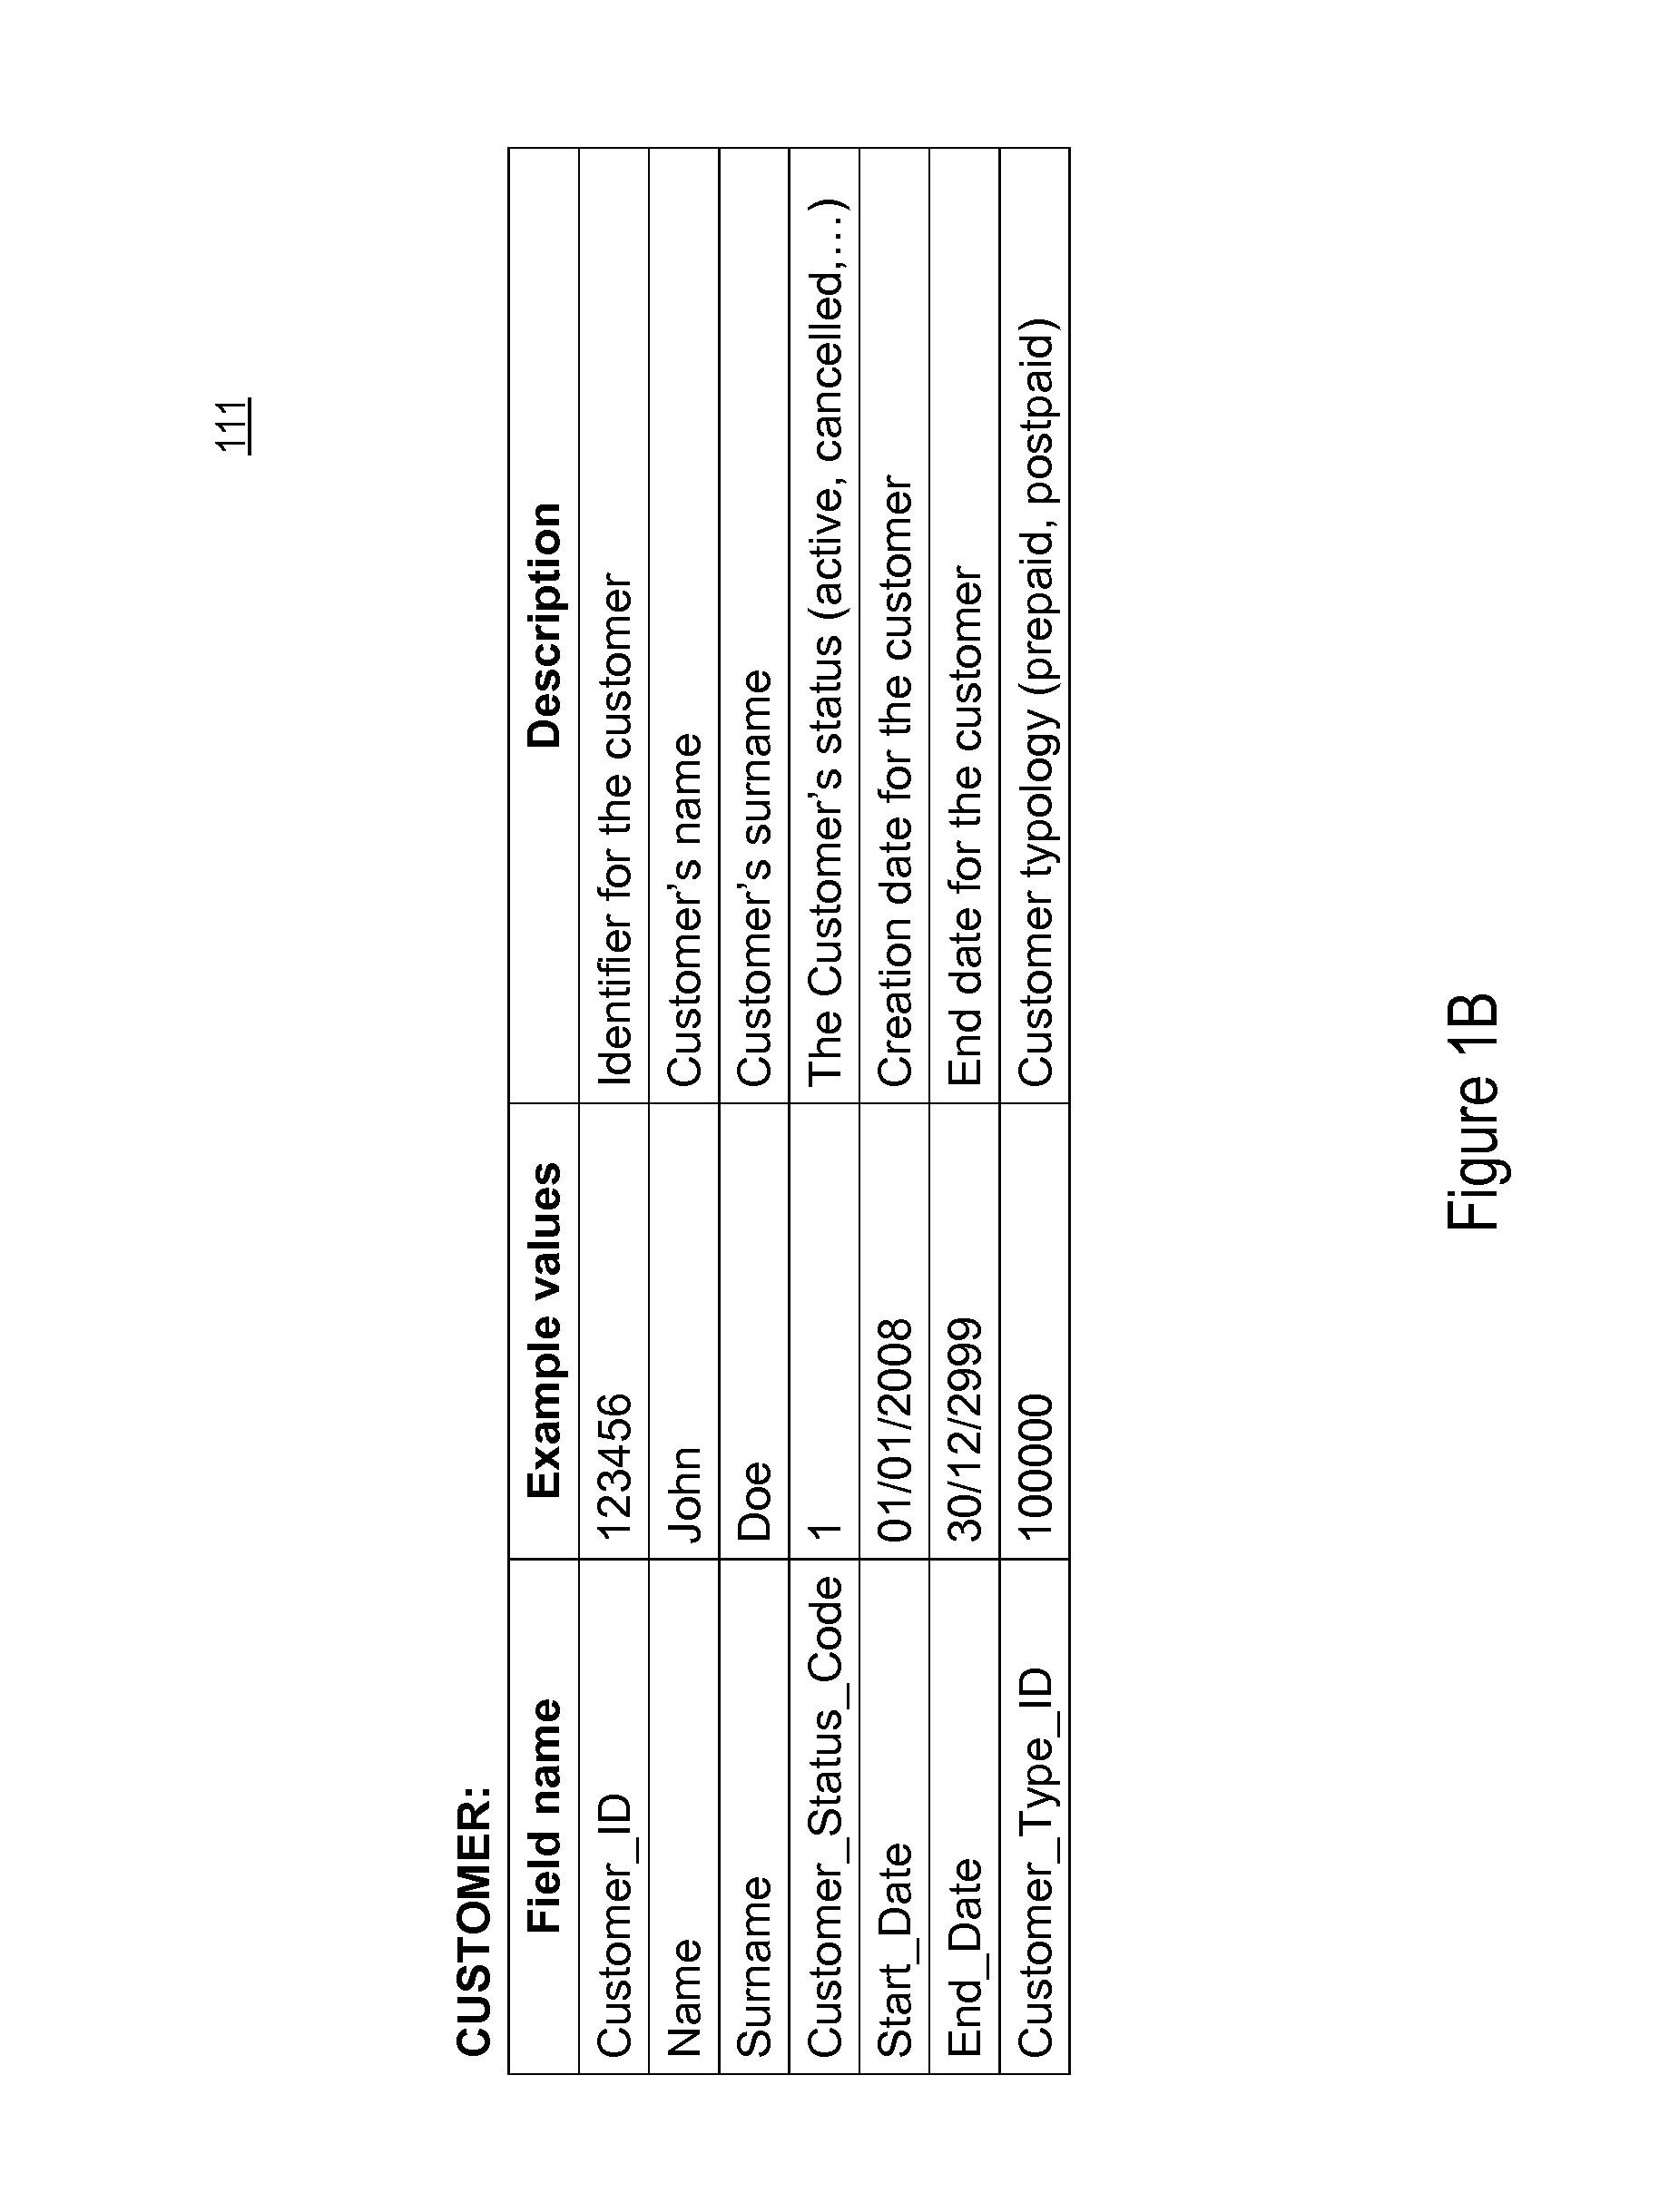 Computer-implemented method, system, and computer program product for telecommunications rating